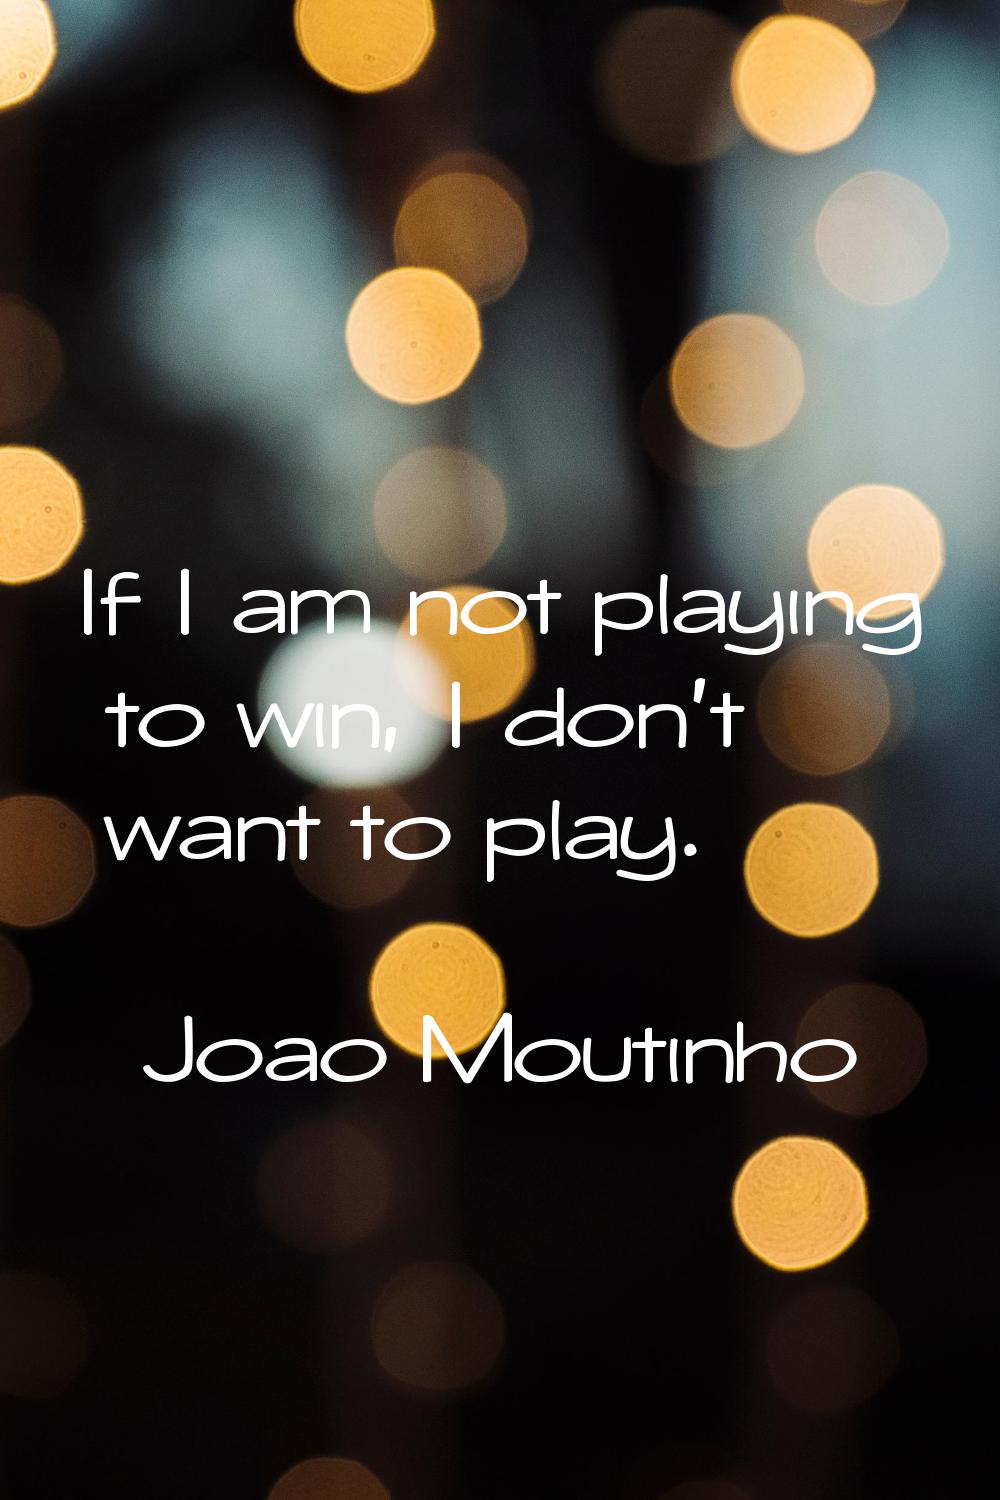 If I am not playing to win, I don't want to play.